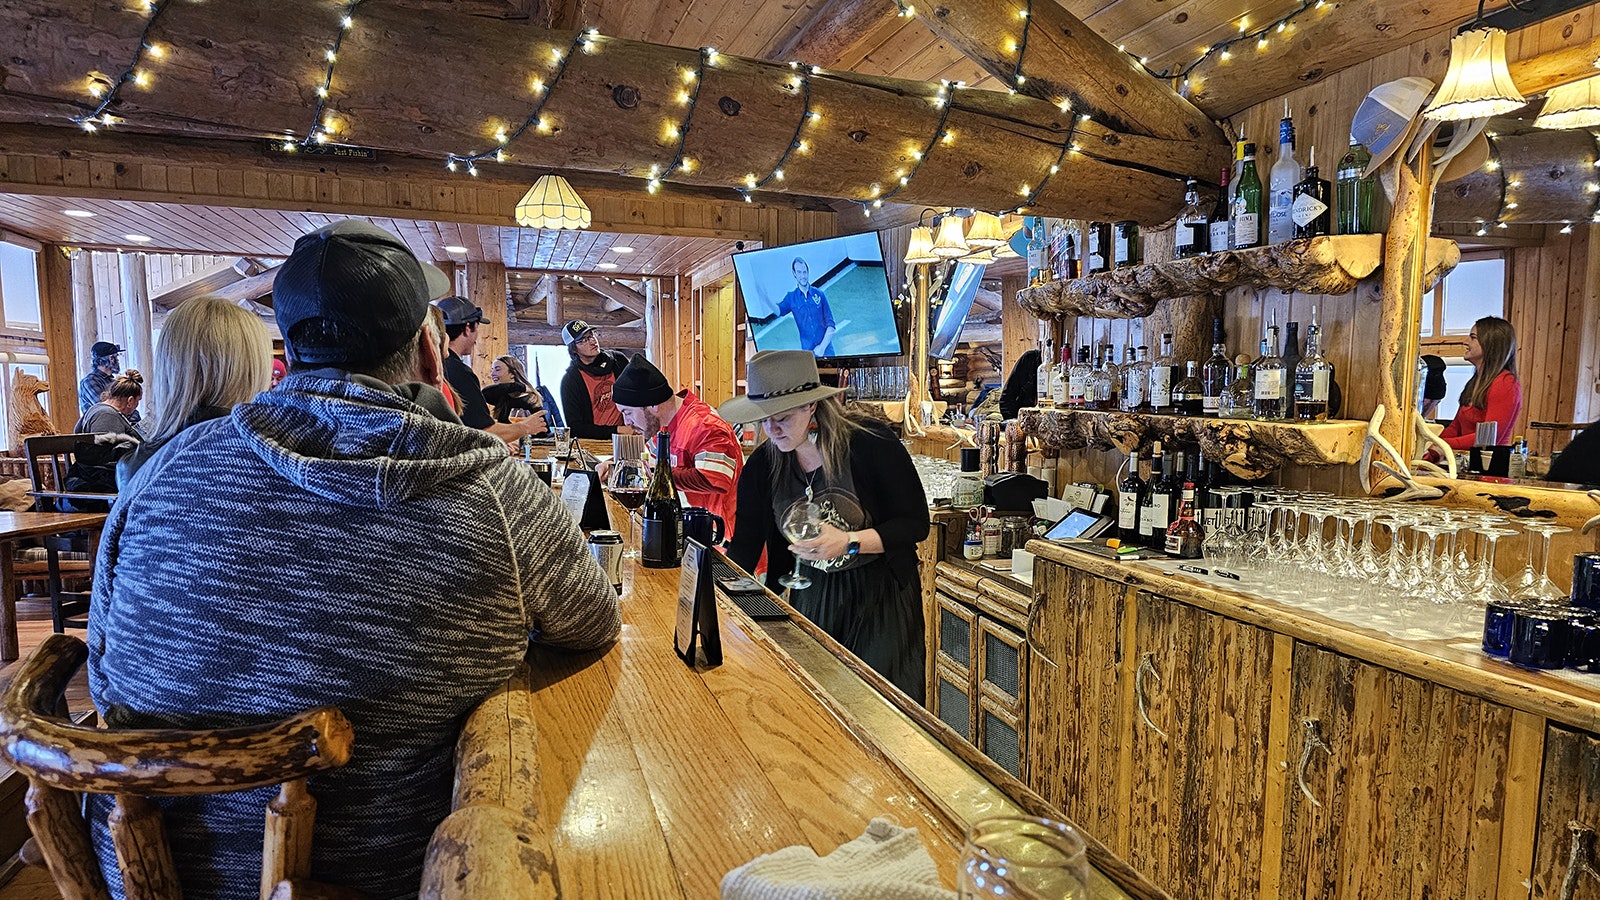 The bar is a popular gathering spot at Brooks Lake Lodge.